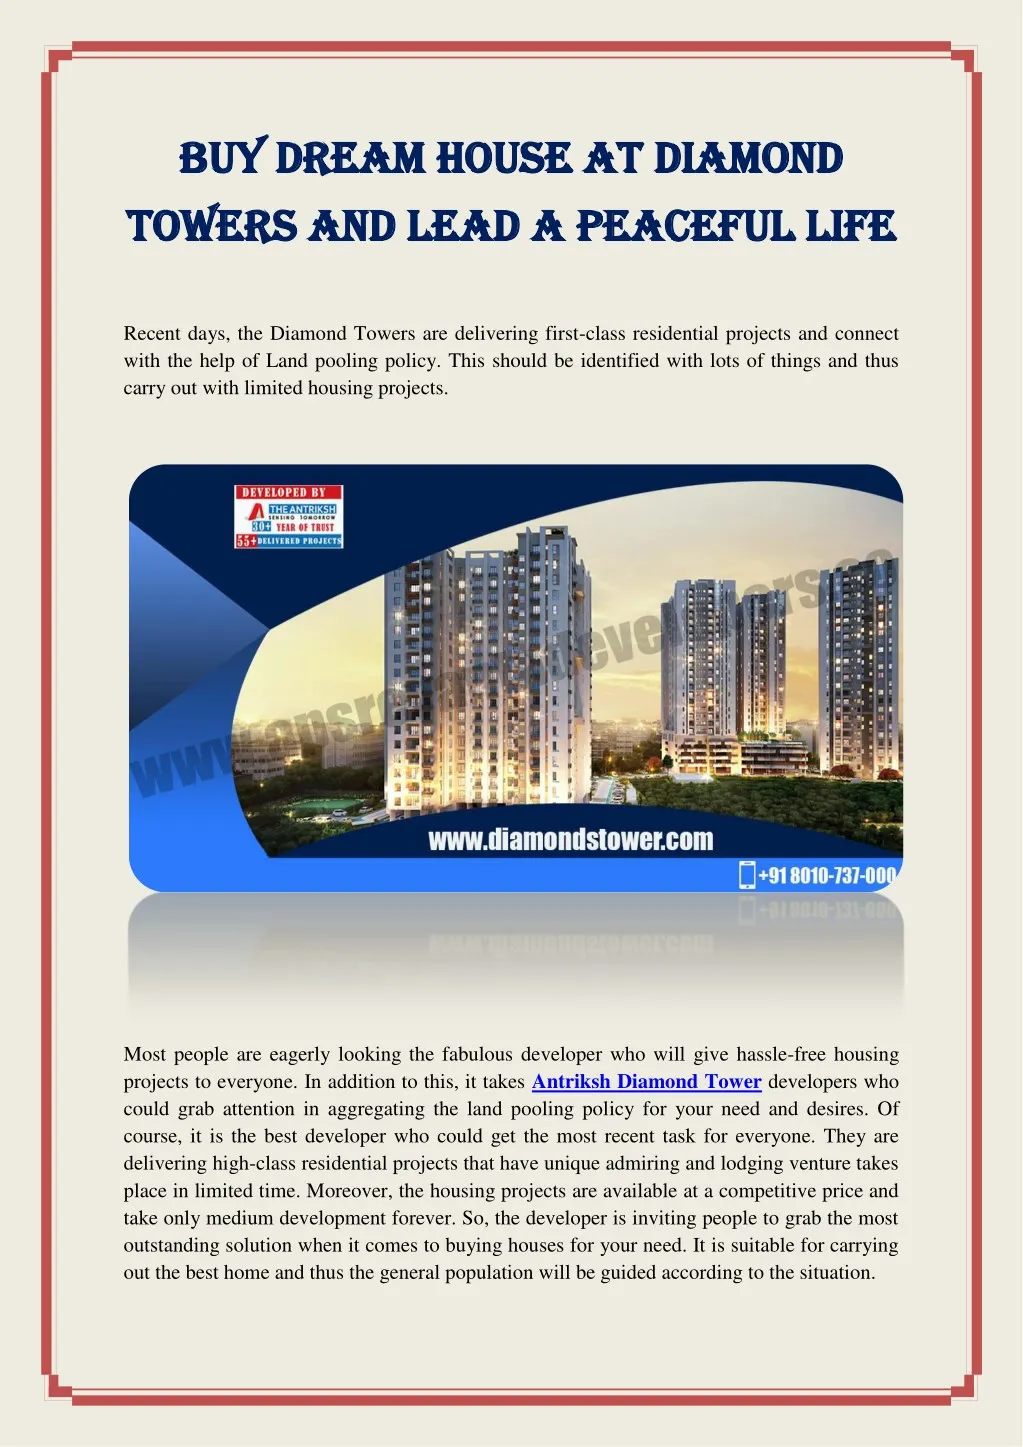 buy dream h buy dream house towers towers